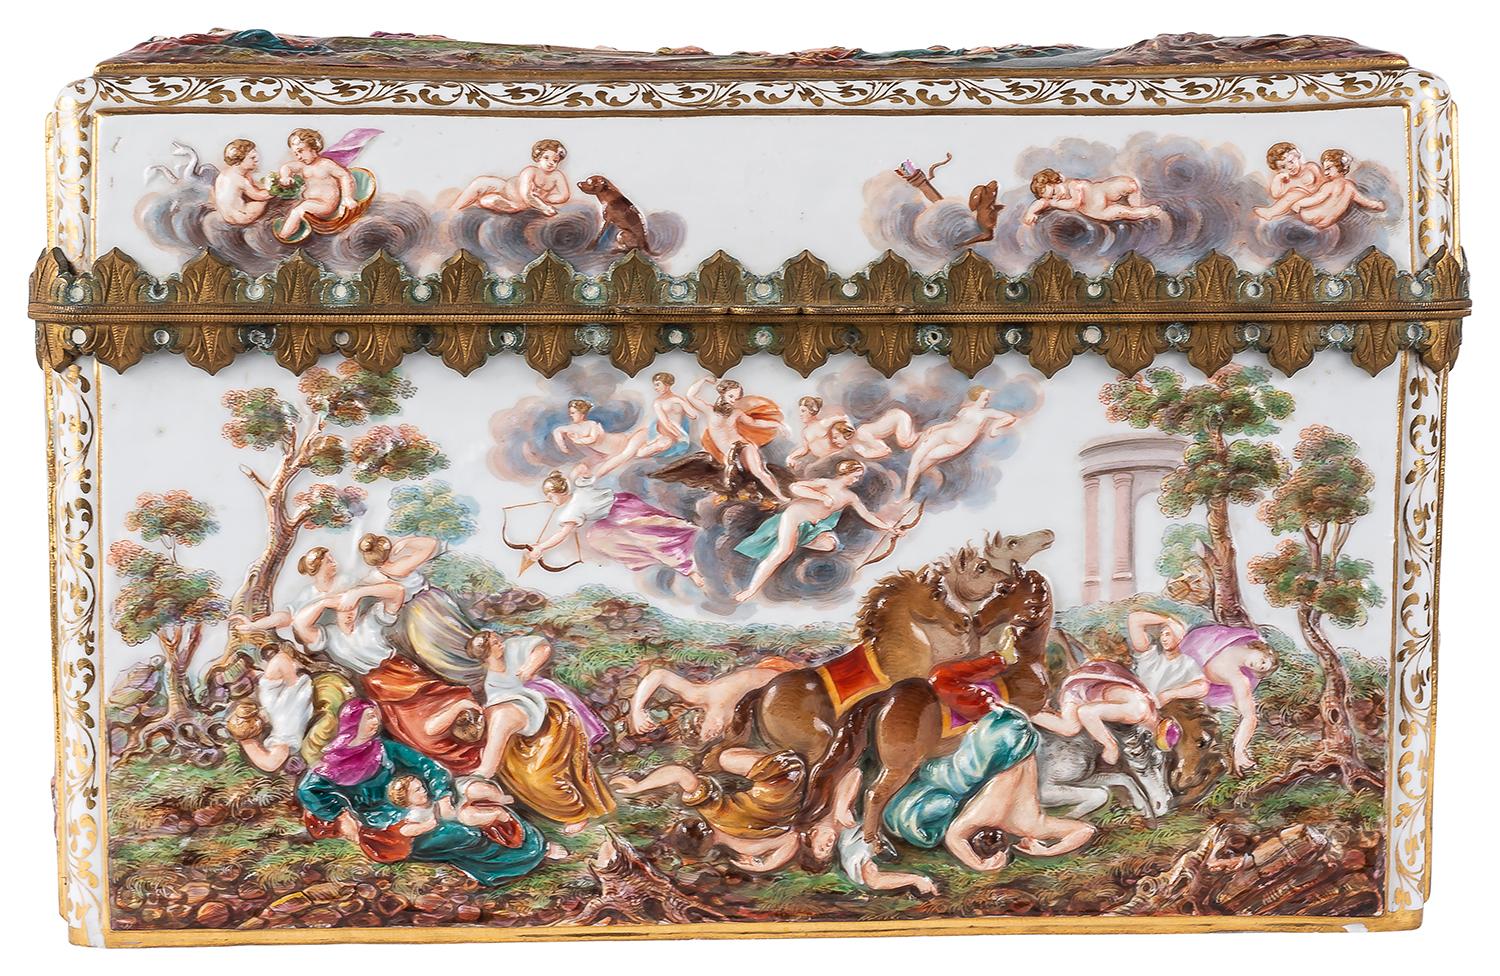 I very good quality 19th century Meissen porcelain lidded casket.
It features a gladiatorial scene with the Emperor and Empress on the lid, the sides are lavishly decorated with playful putti and hunting scenes, and it has an attractive ormolu